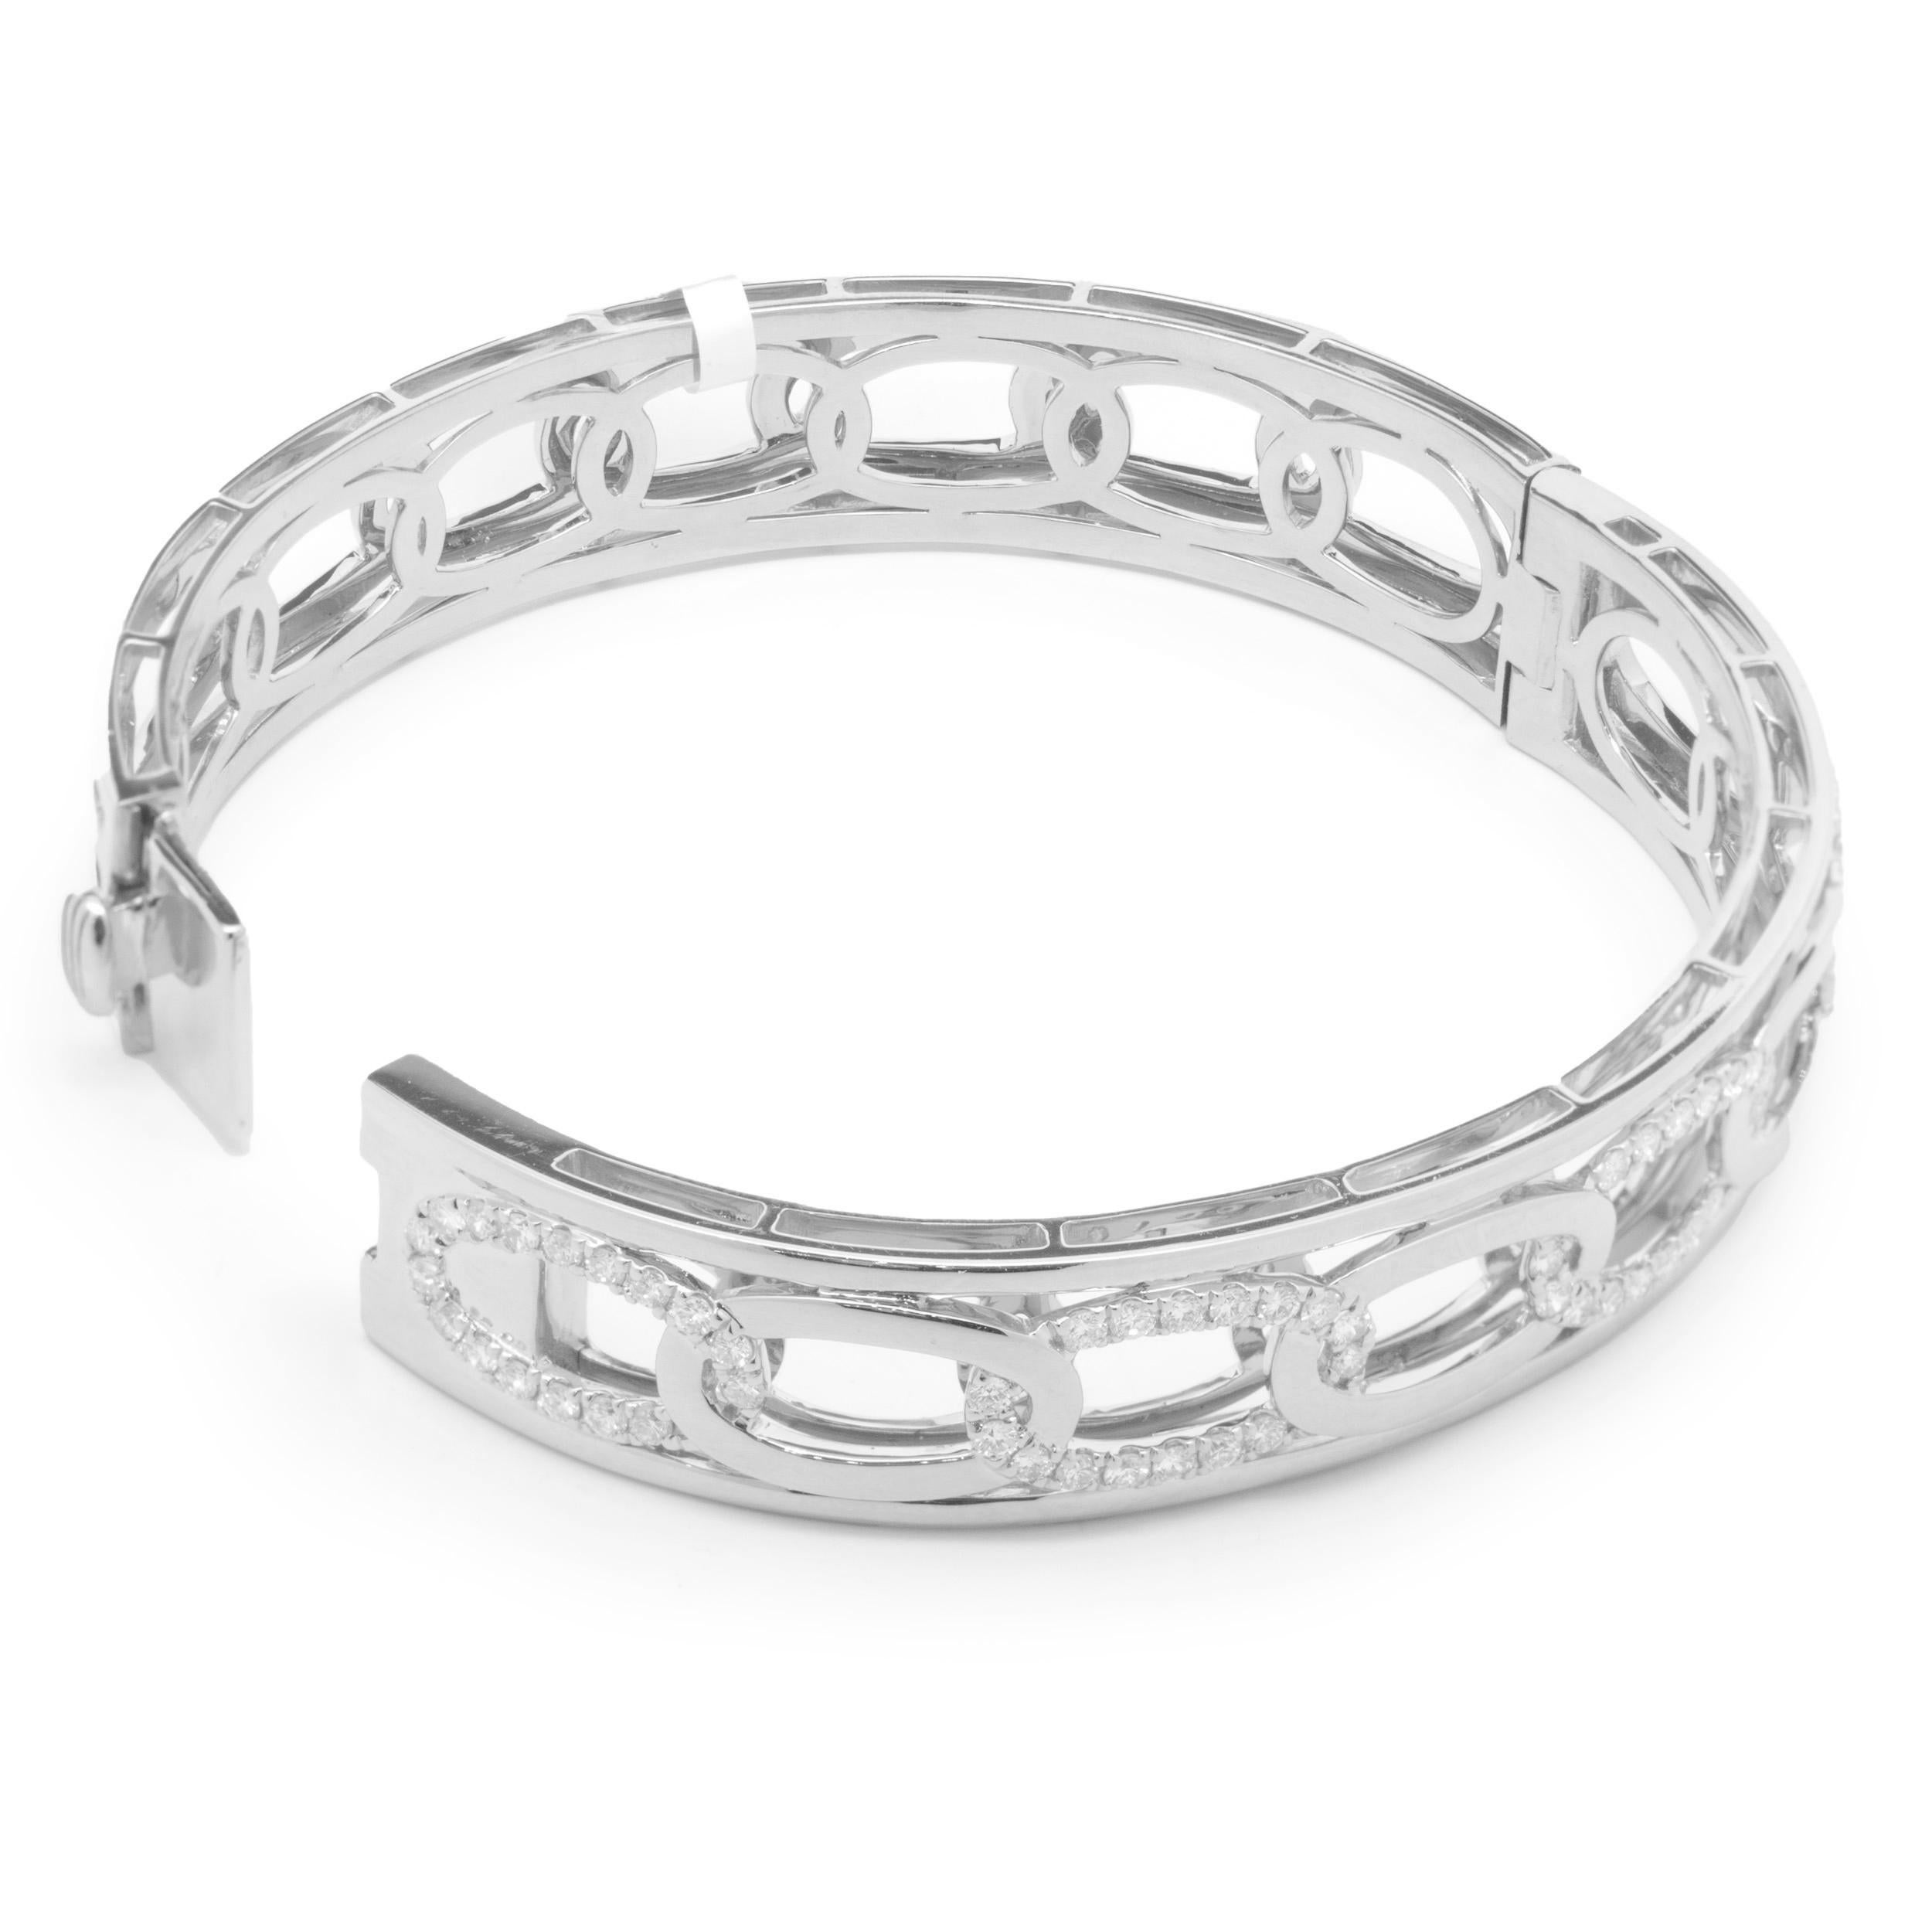 Designer: custom
Material: 18K white gold
Diamonds: 65 round brilliant cut = 1.25cttw
Color: F
Clarity: VS2
Dimensions: bracelet will fit up to a 7.5-inch wrist
Weight: 36.84 grams